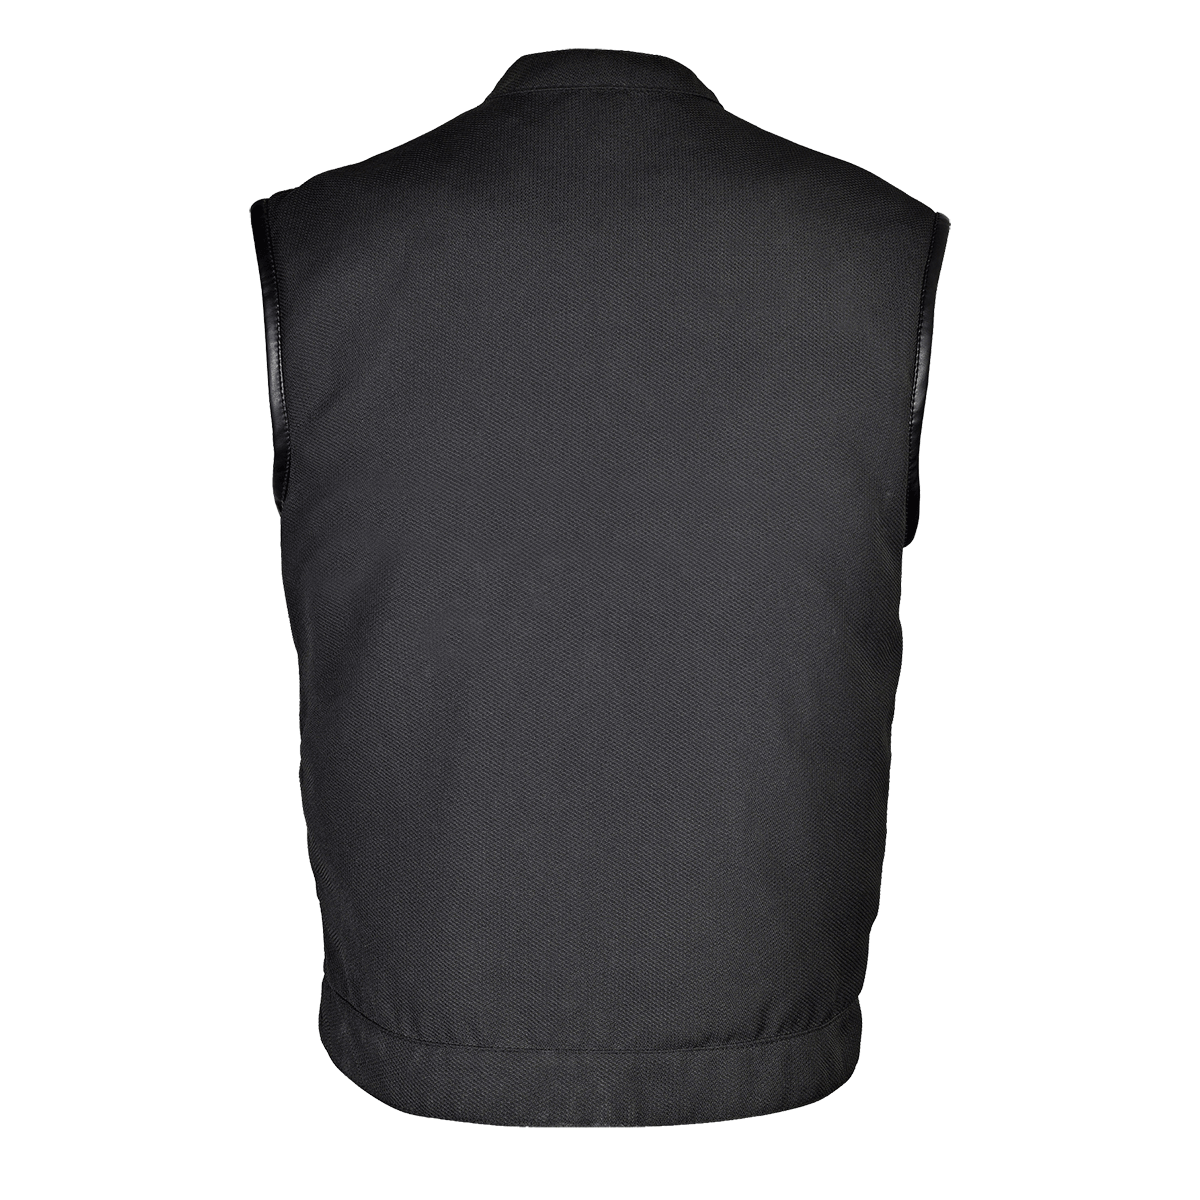 VL1914 Heavy Duty Textile Club Vest with Snaps And Zipper Closure